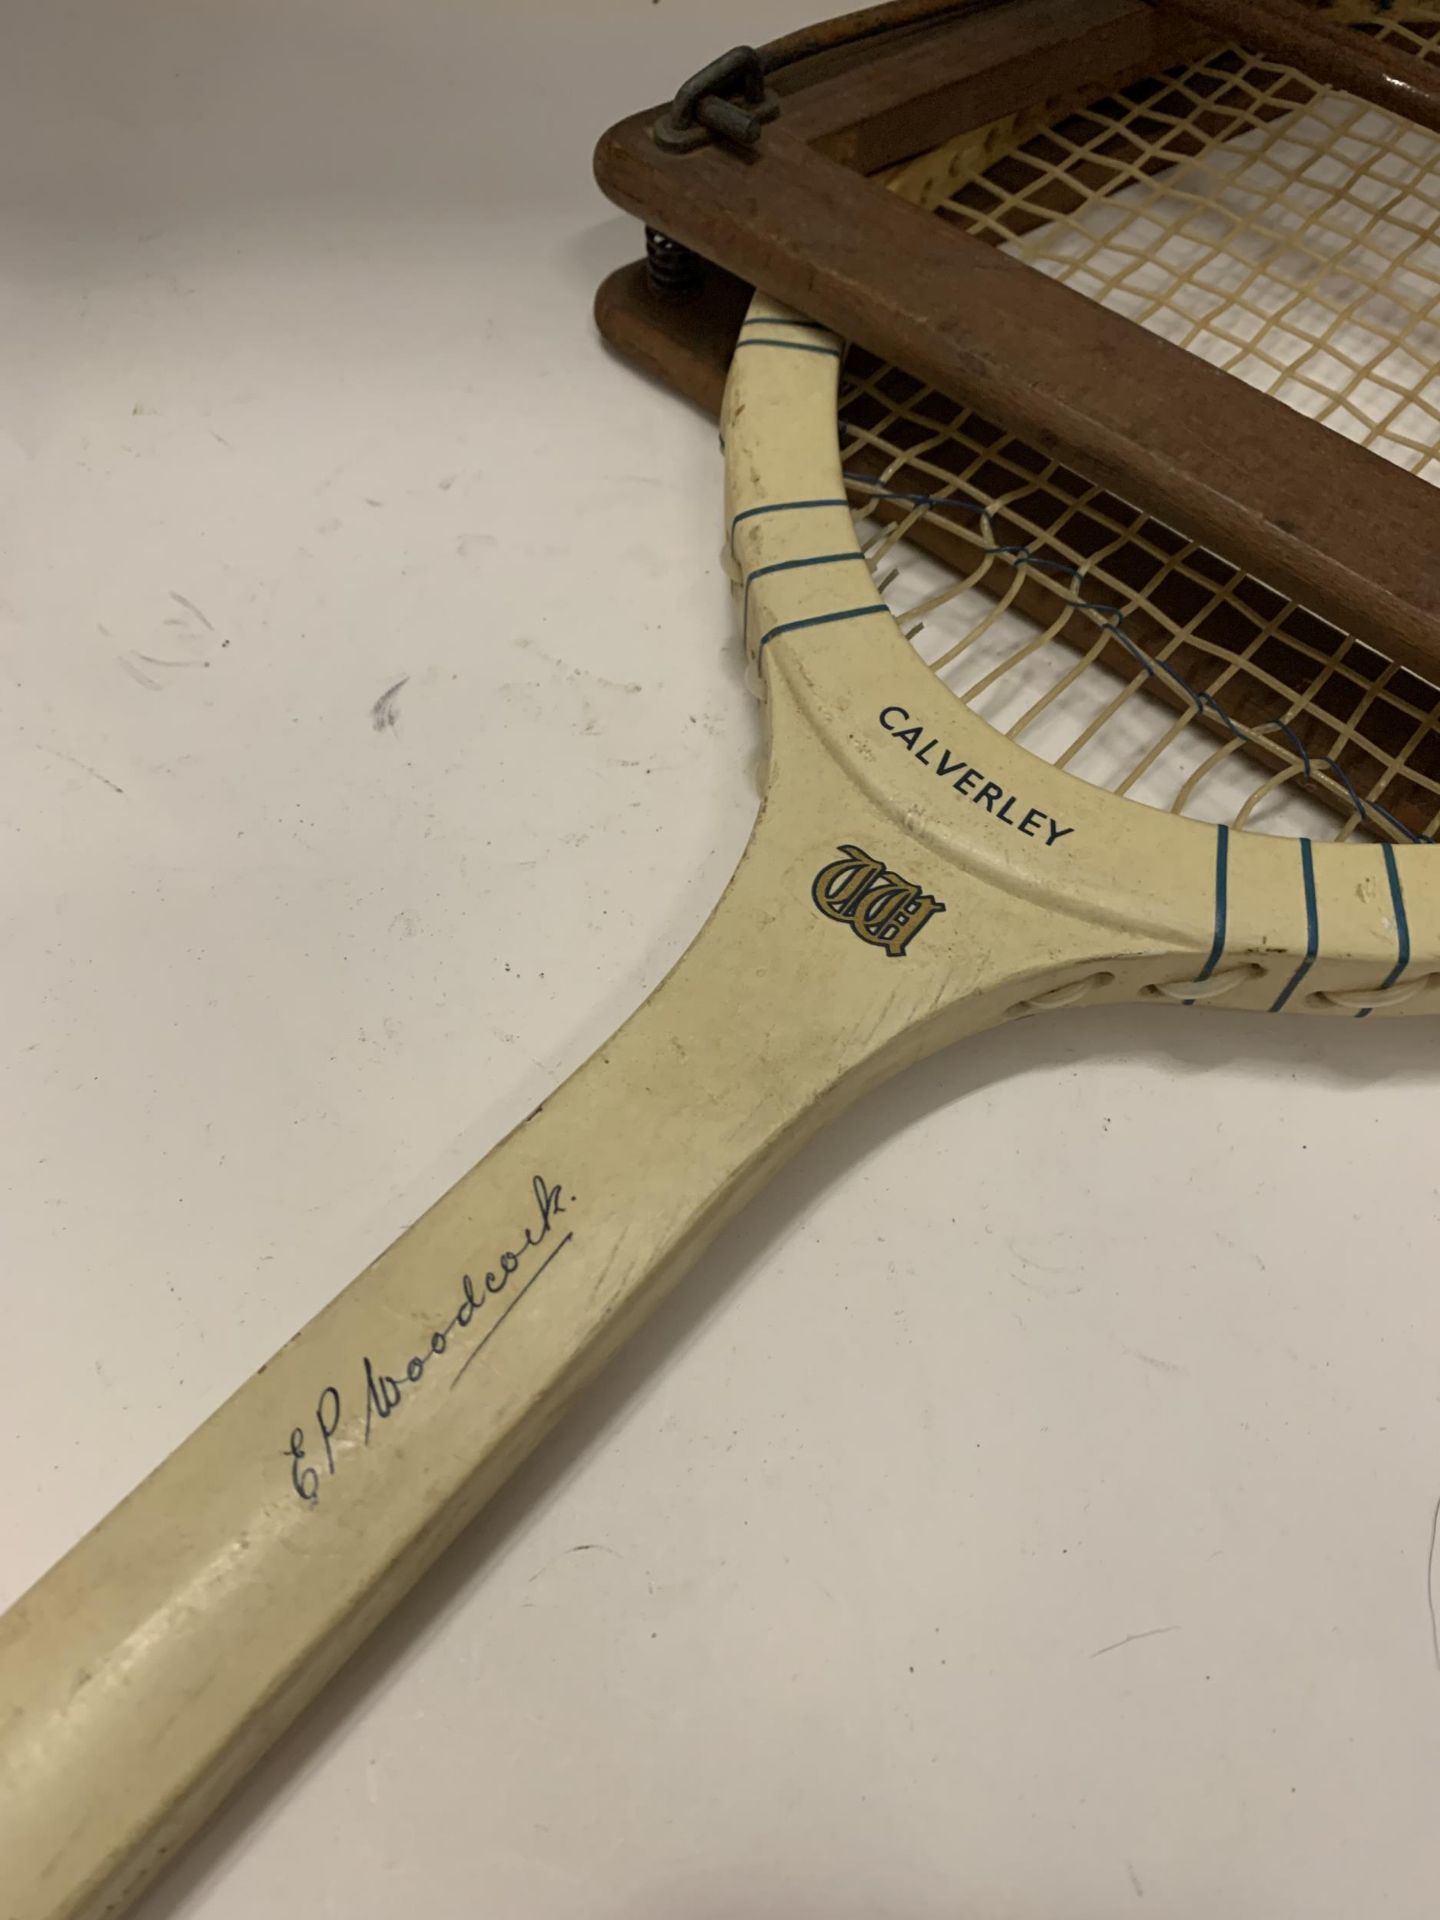 A VINTAGE CALVERLEY TENNIS RACKET WITH THE RACKET FRAME, SIGNED E P WOODCOCK - Image 3 of 5